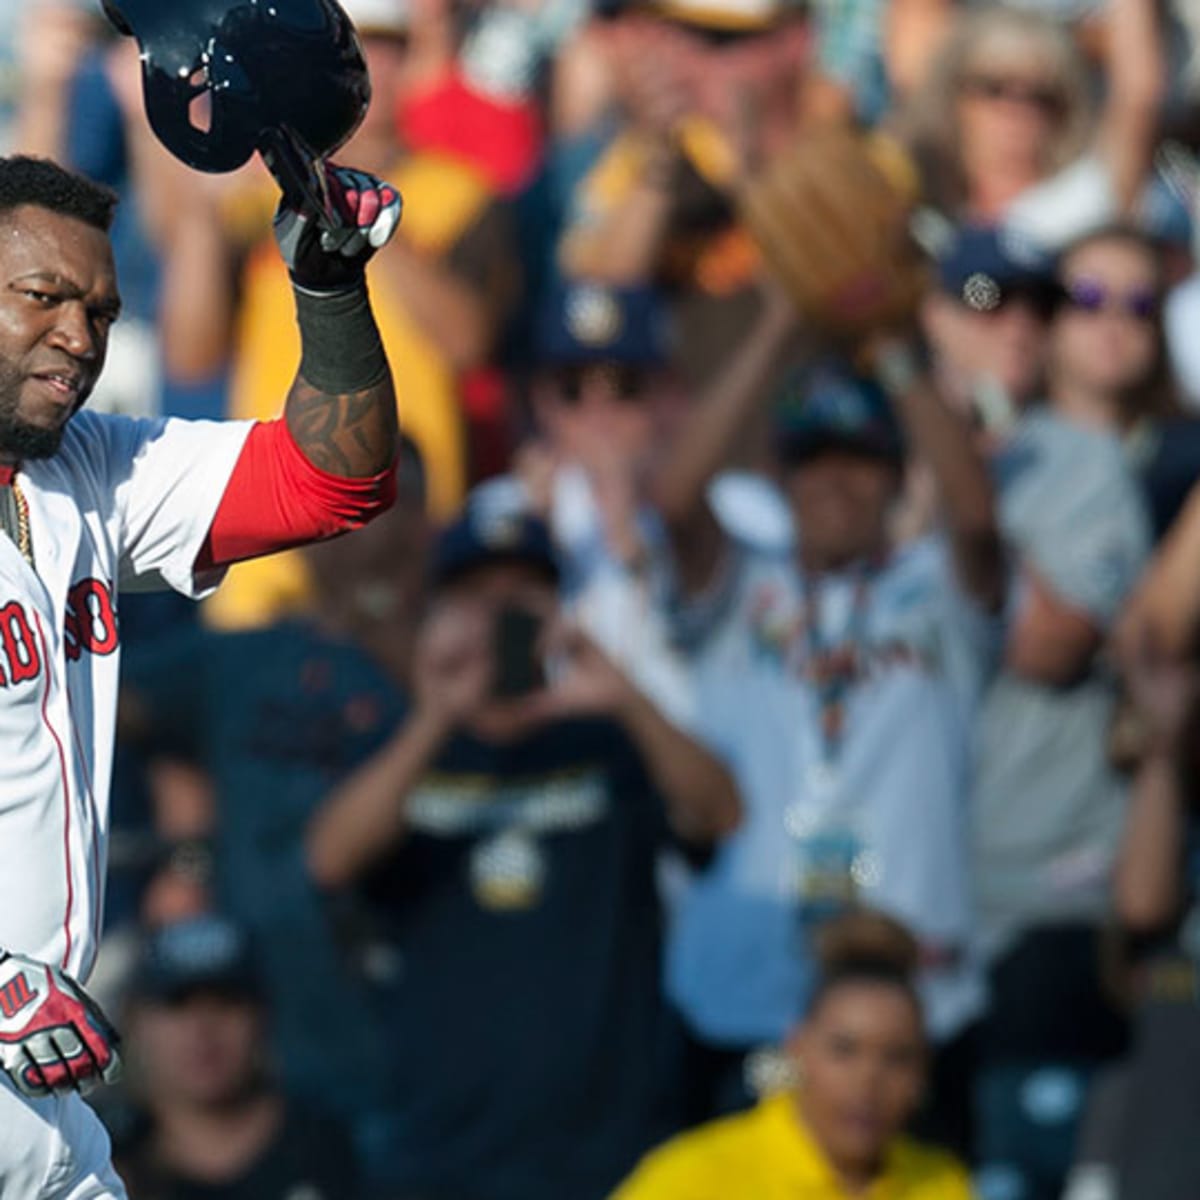 David Ortiz to retire from Red Sox after 2016 season – New York Daily News